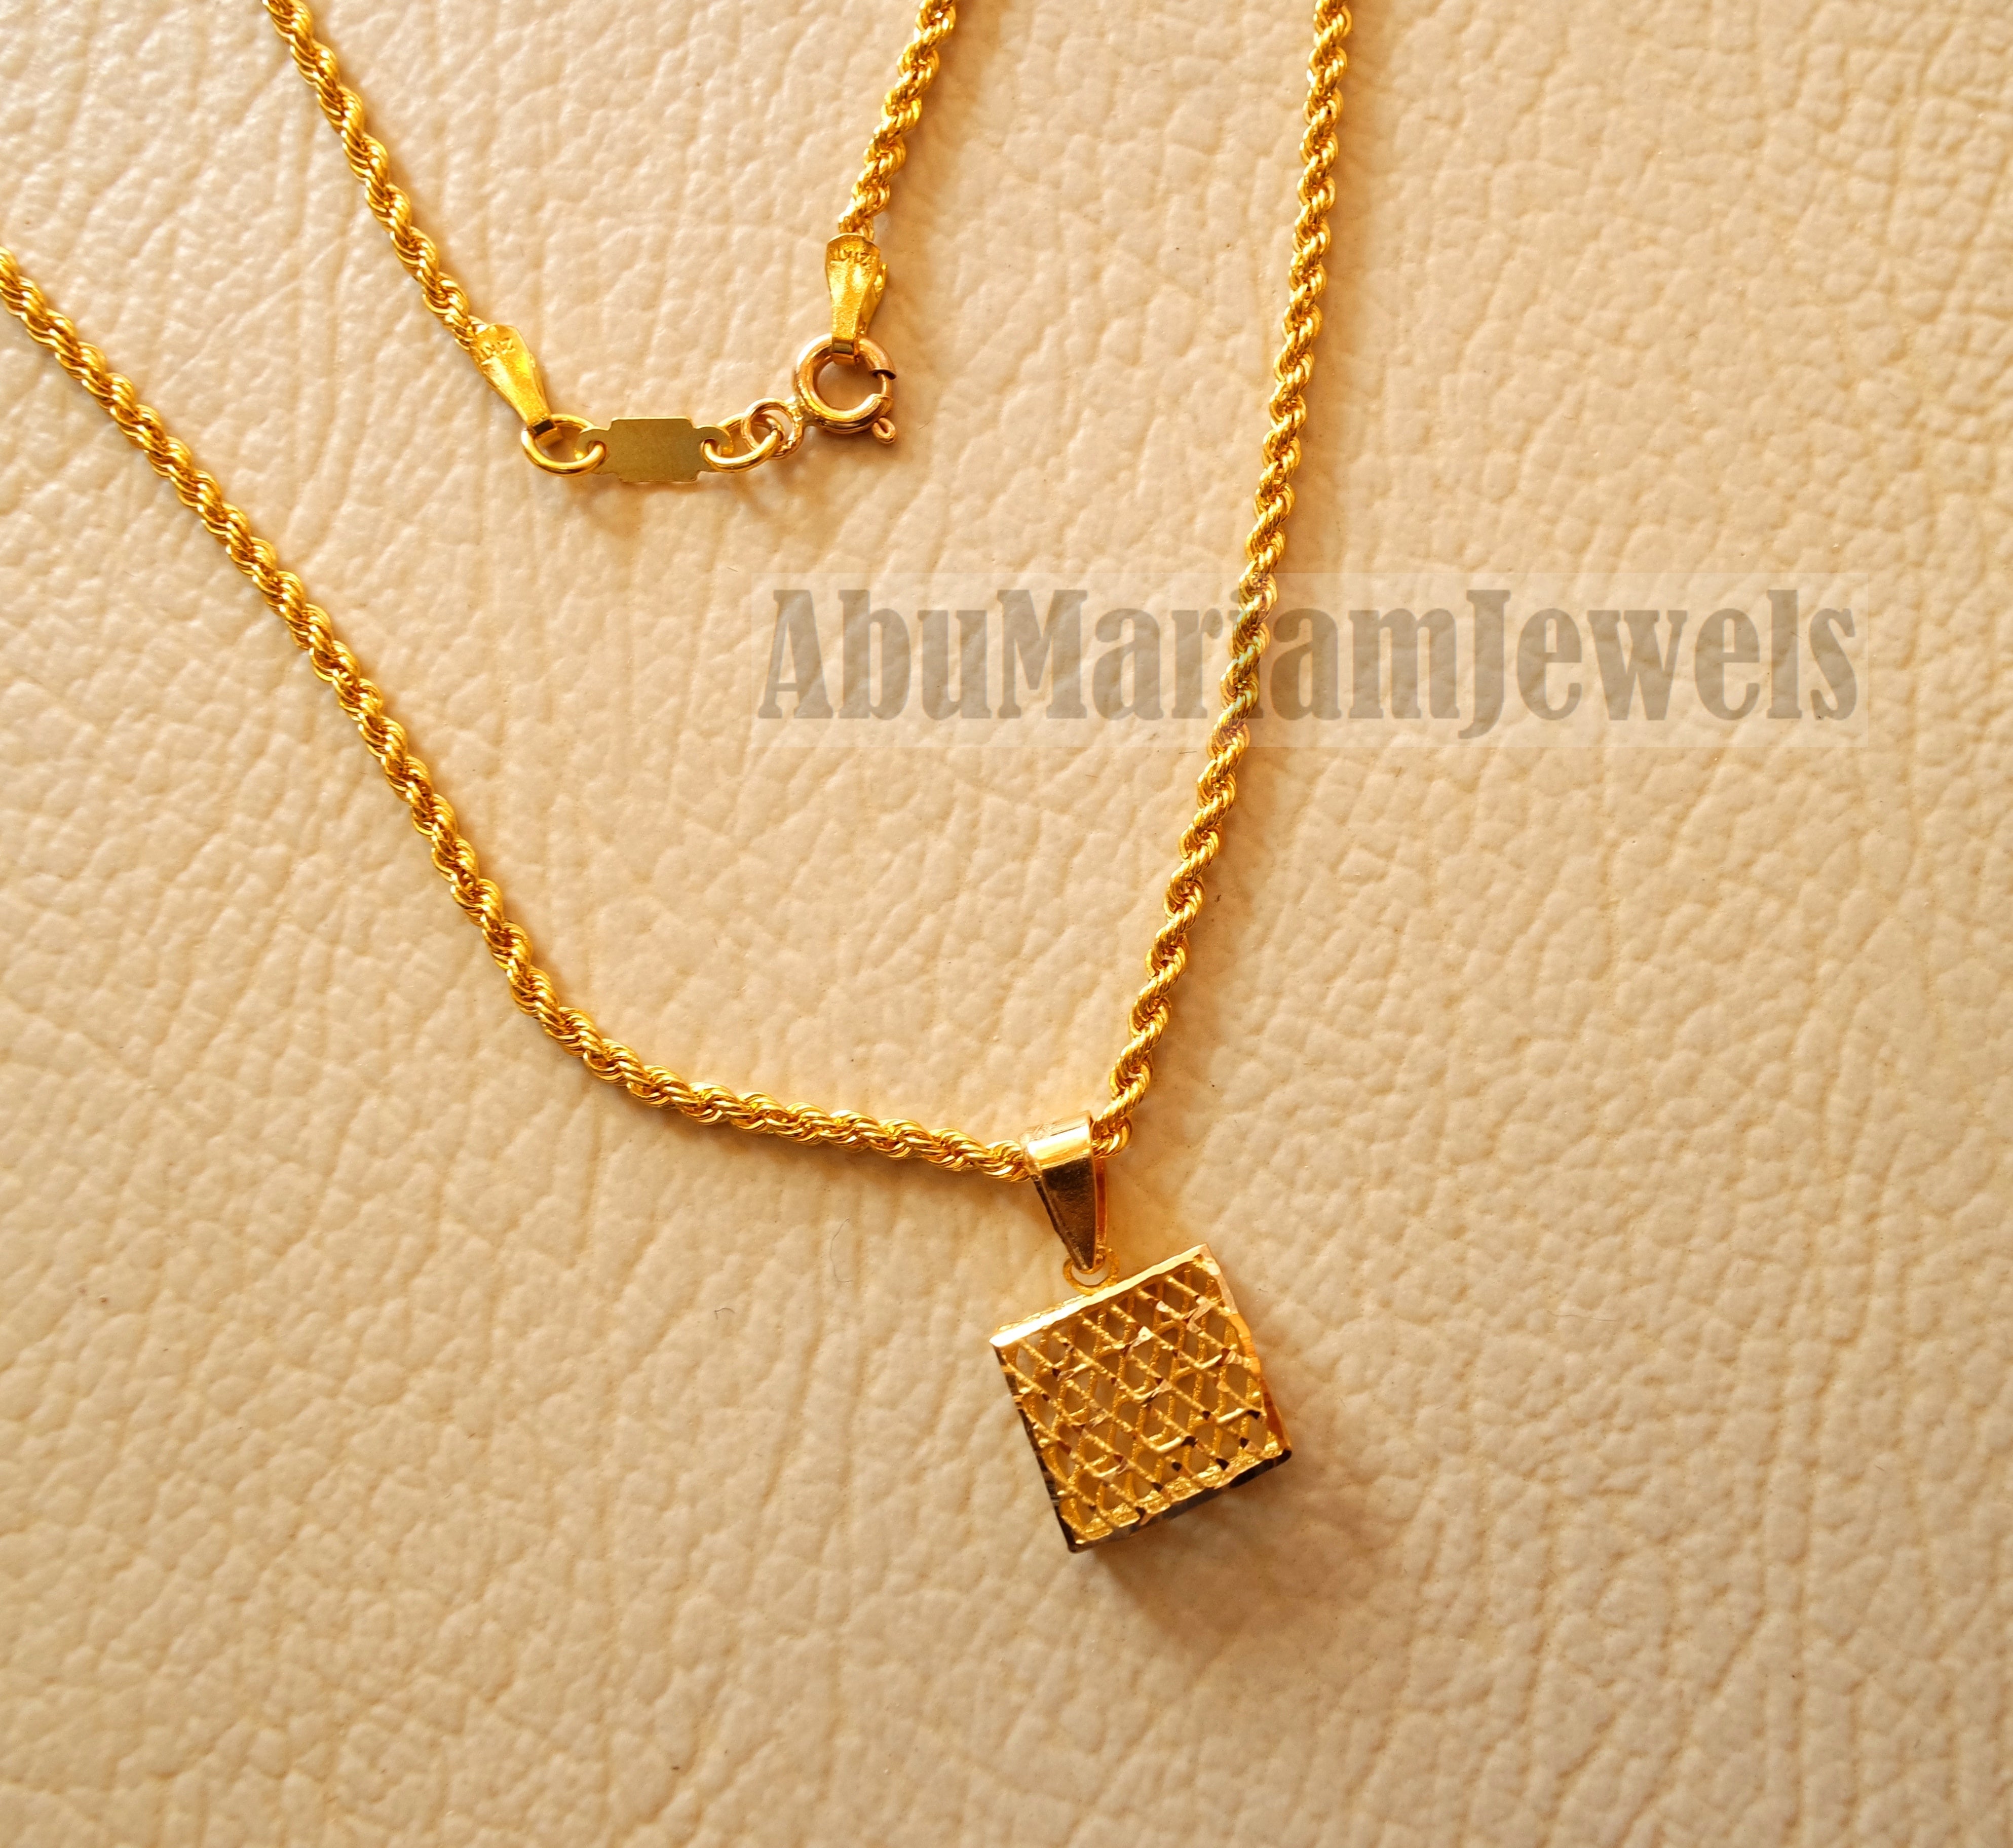 Square 3d 21 k gold pendant with rope chain fine jewelry necklace fast shipping